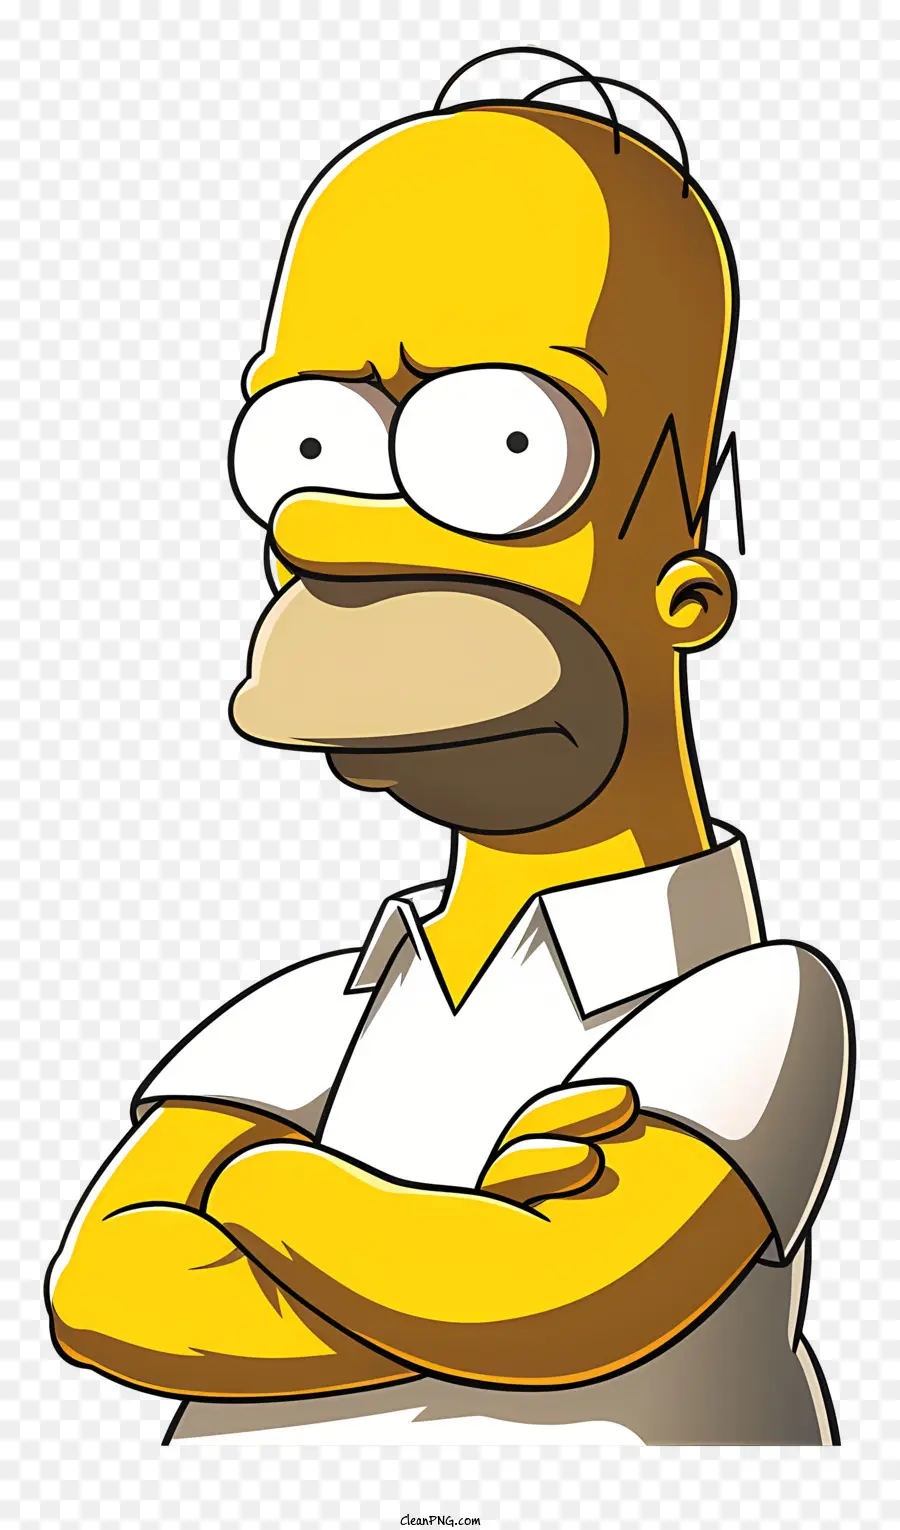 simpsons the simpsons cartoon character serious expression crossed arms